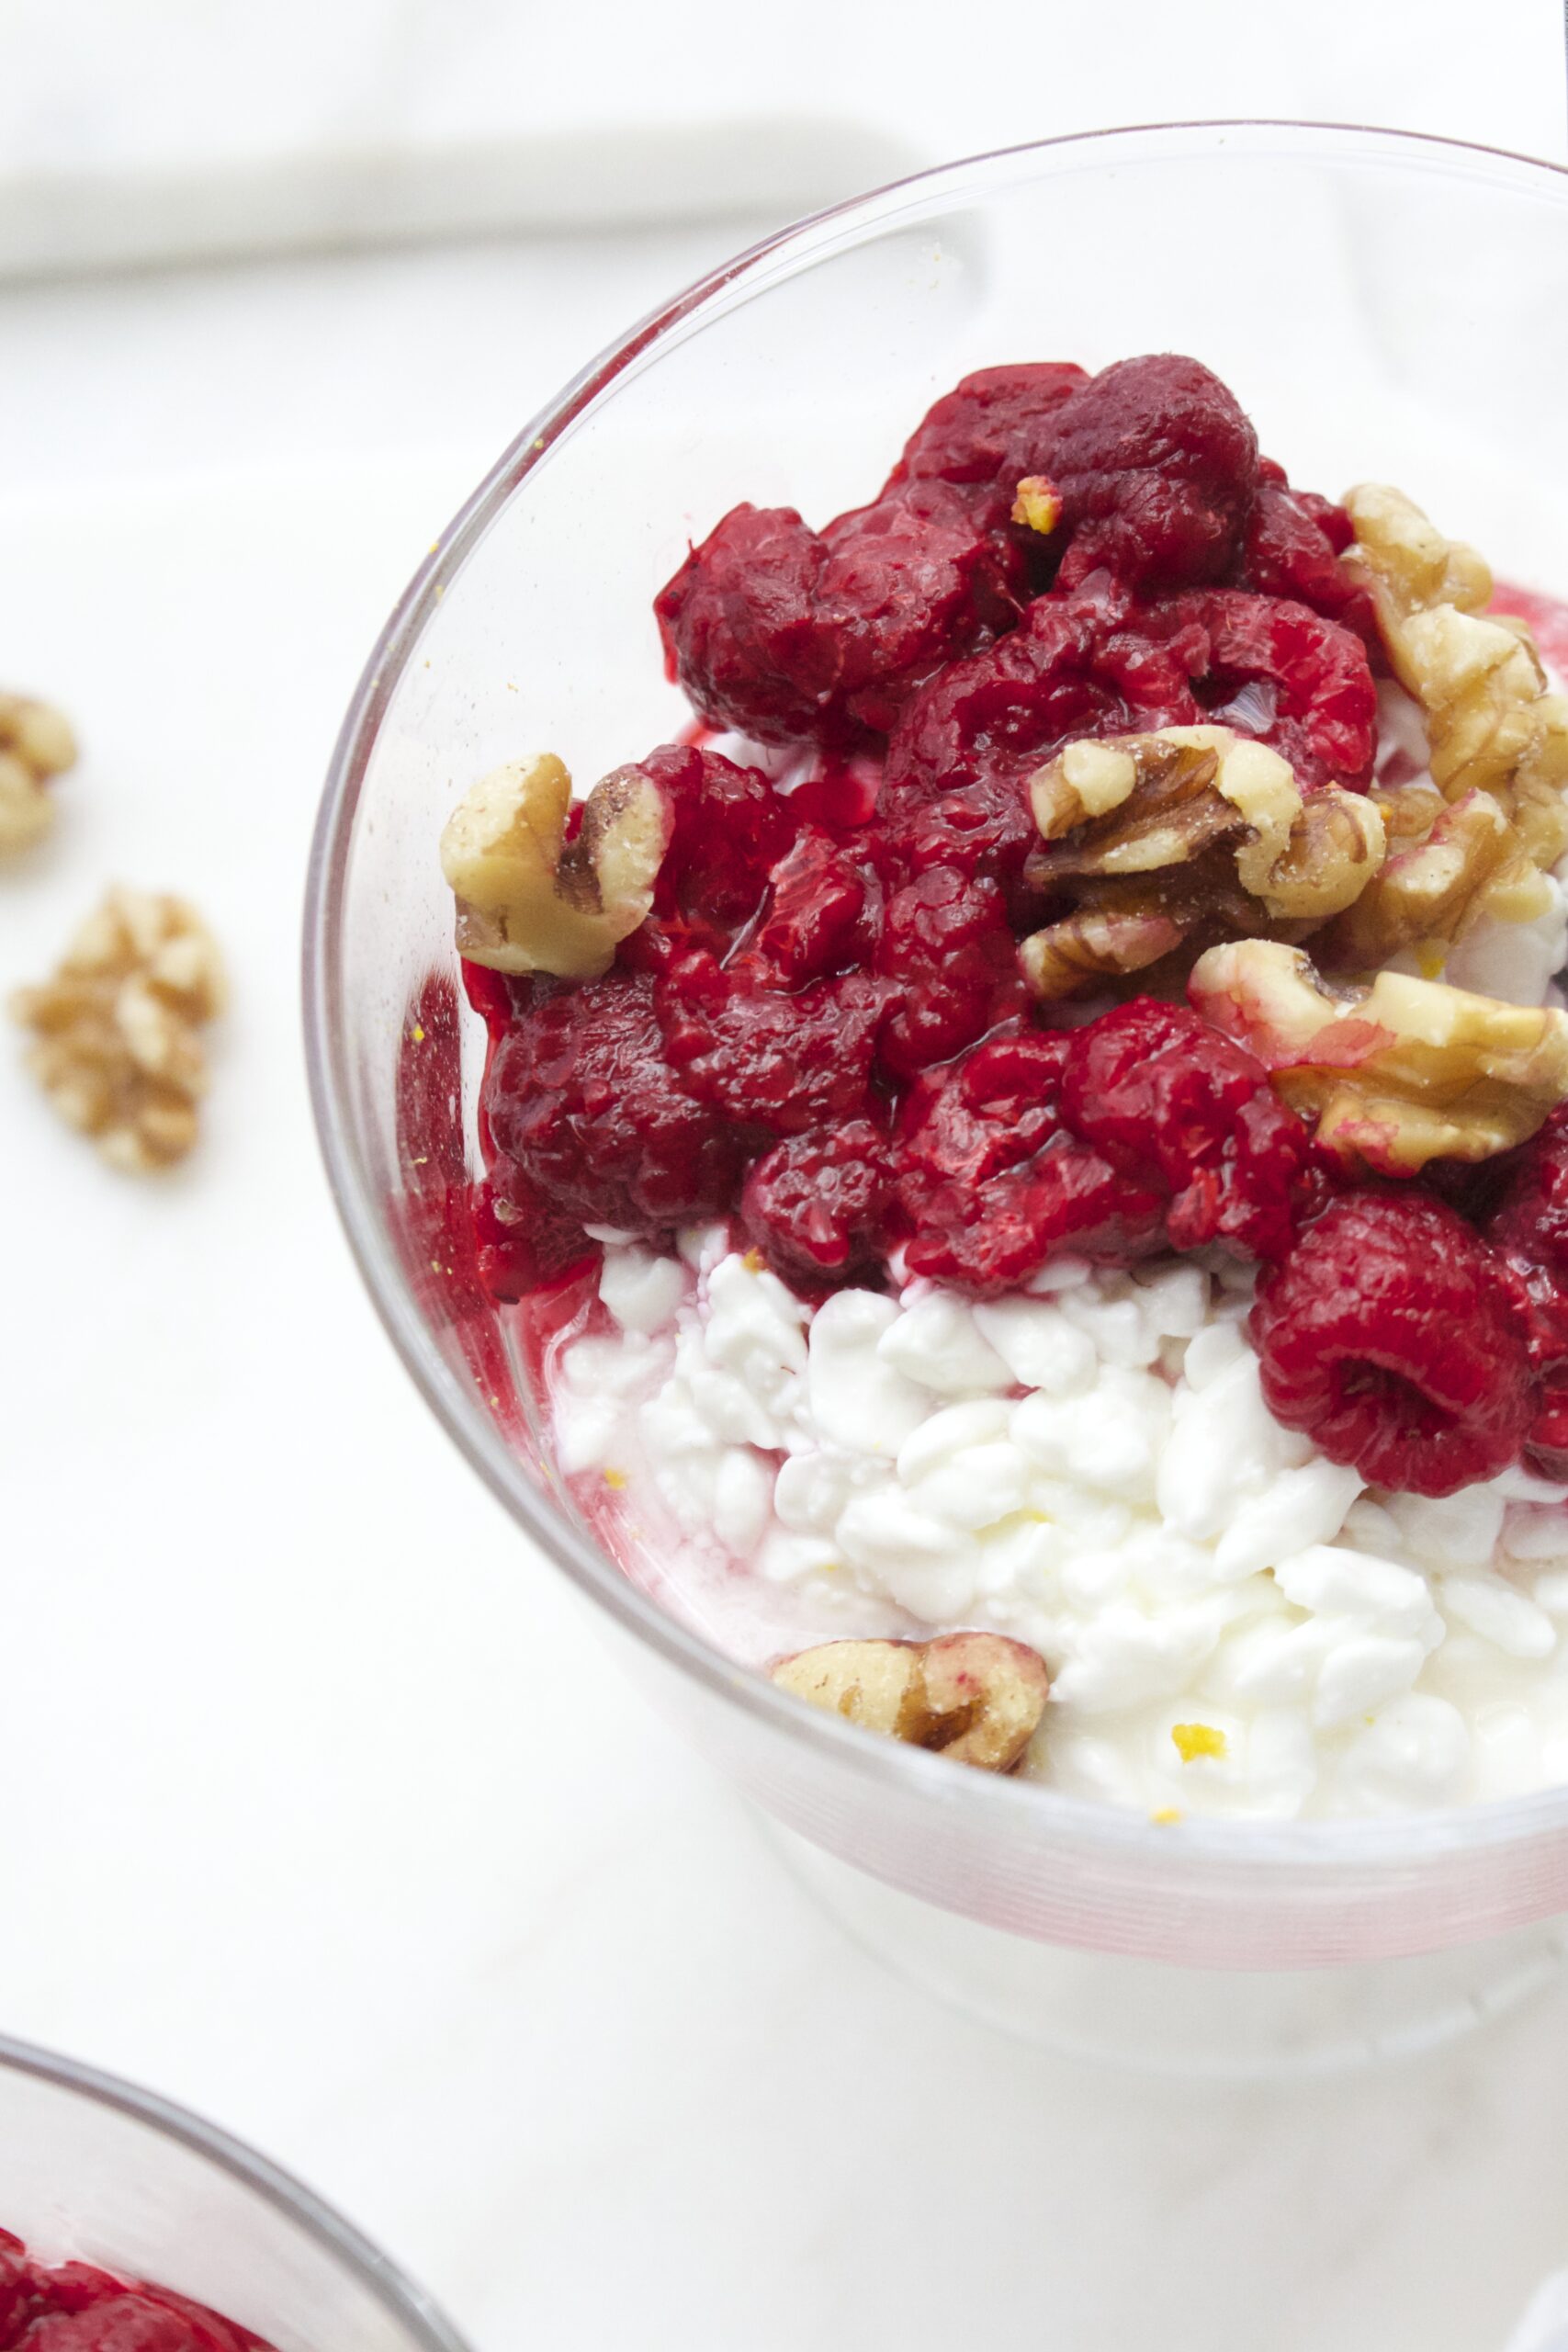 Spiced Raspberries with Cottage Cheese and Walnuts